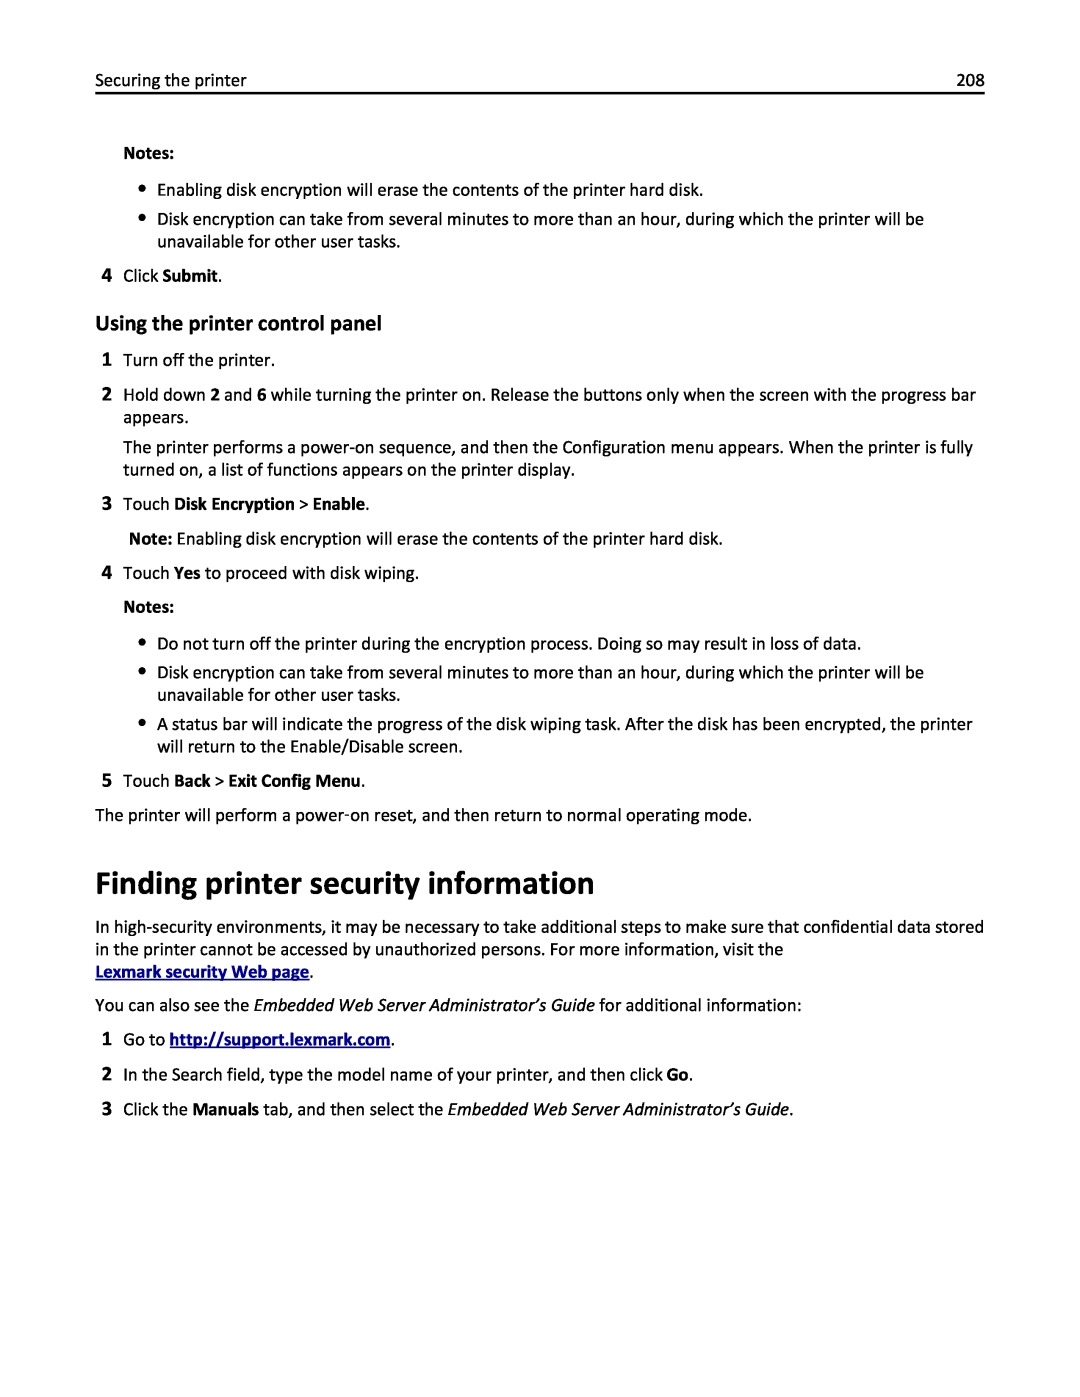 Lexmark 436 manual Finding printer security information, Using the printer control panel, Touch Disk Encryption Enable 